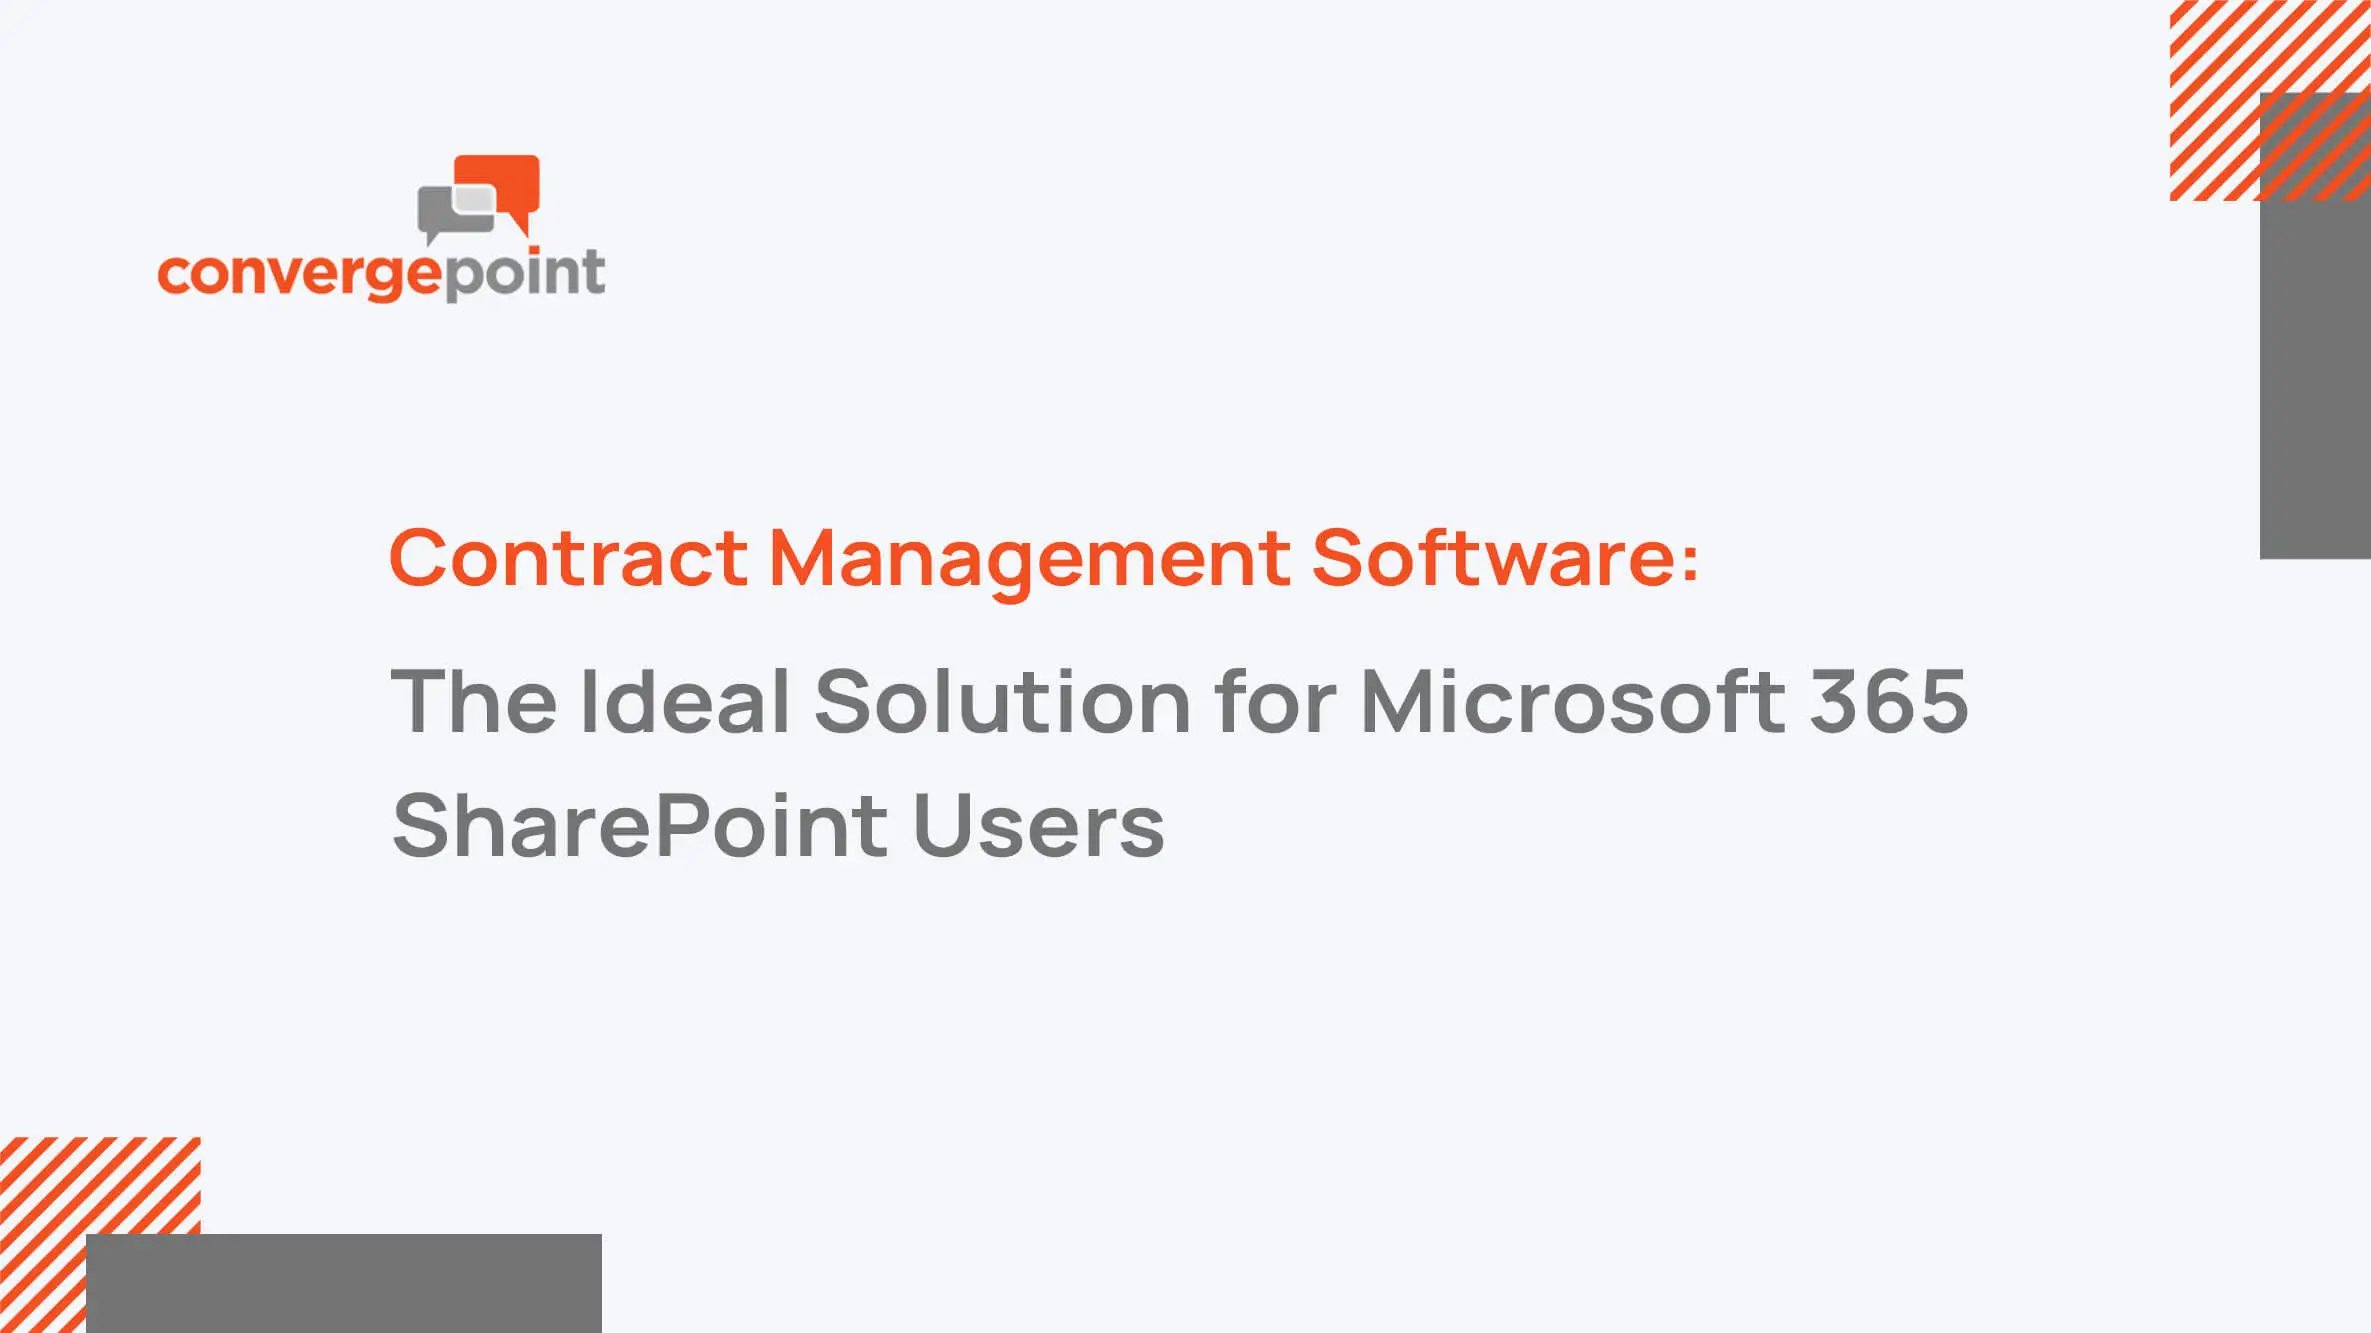 The ideal solution for Microsoft 365 SharePoint Users